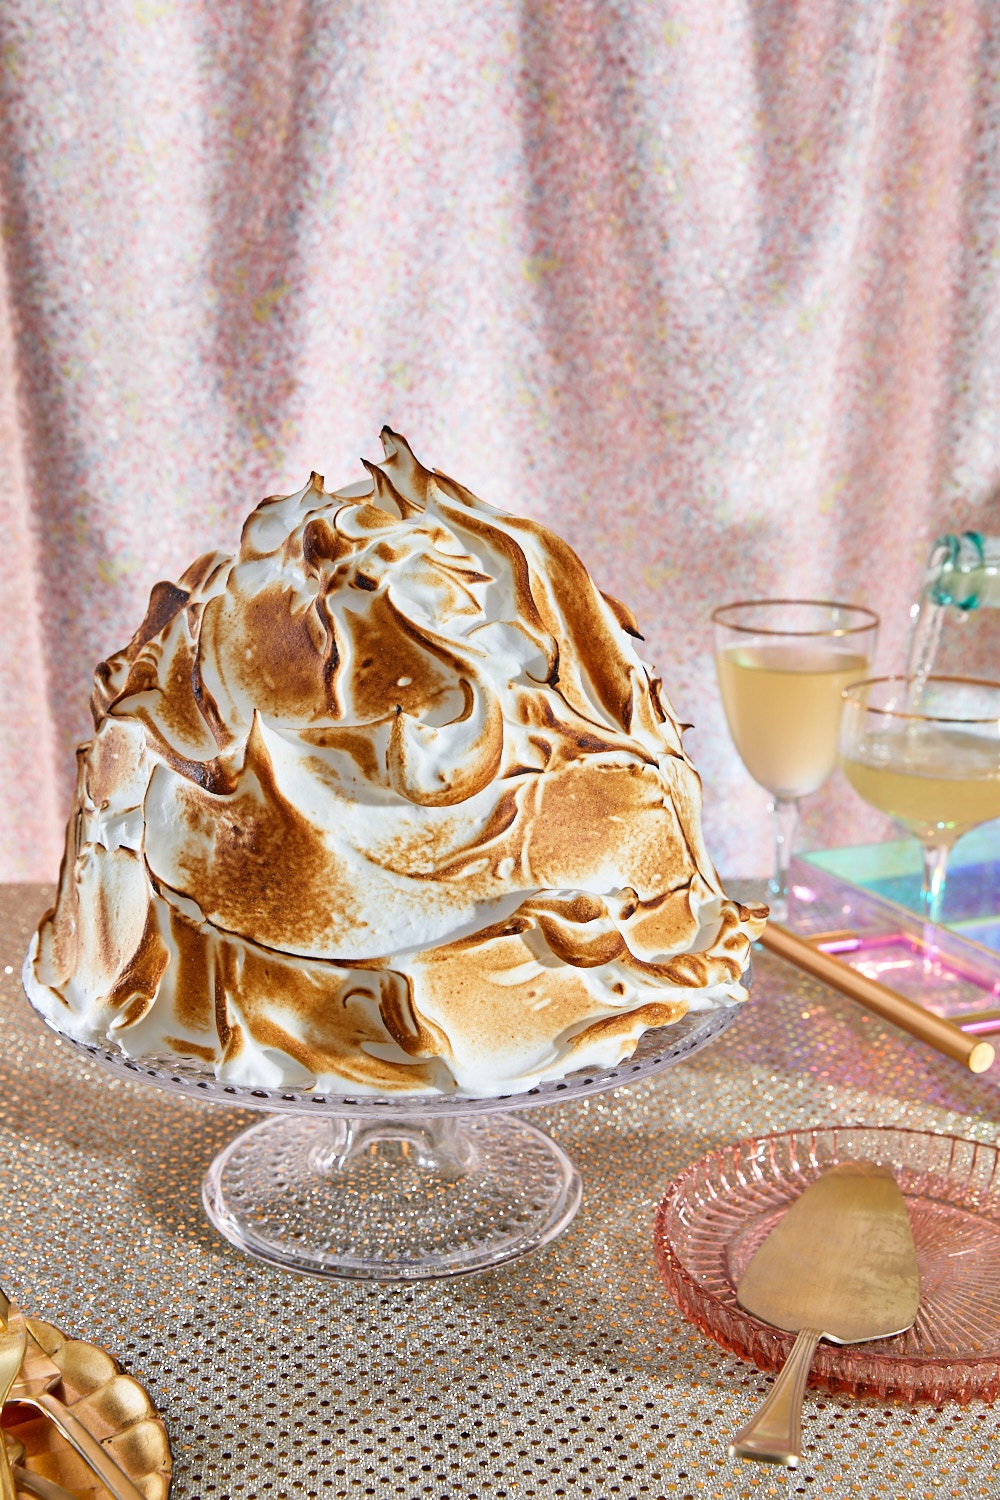 Baked Alaska with wine glasses and pink backdrop